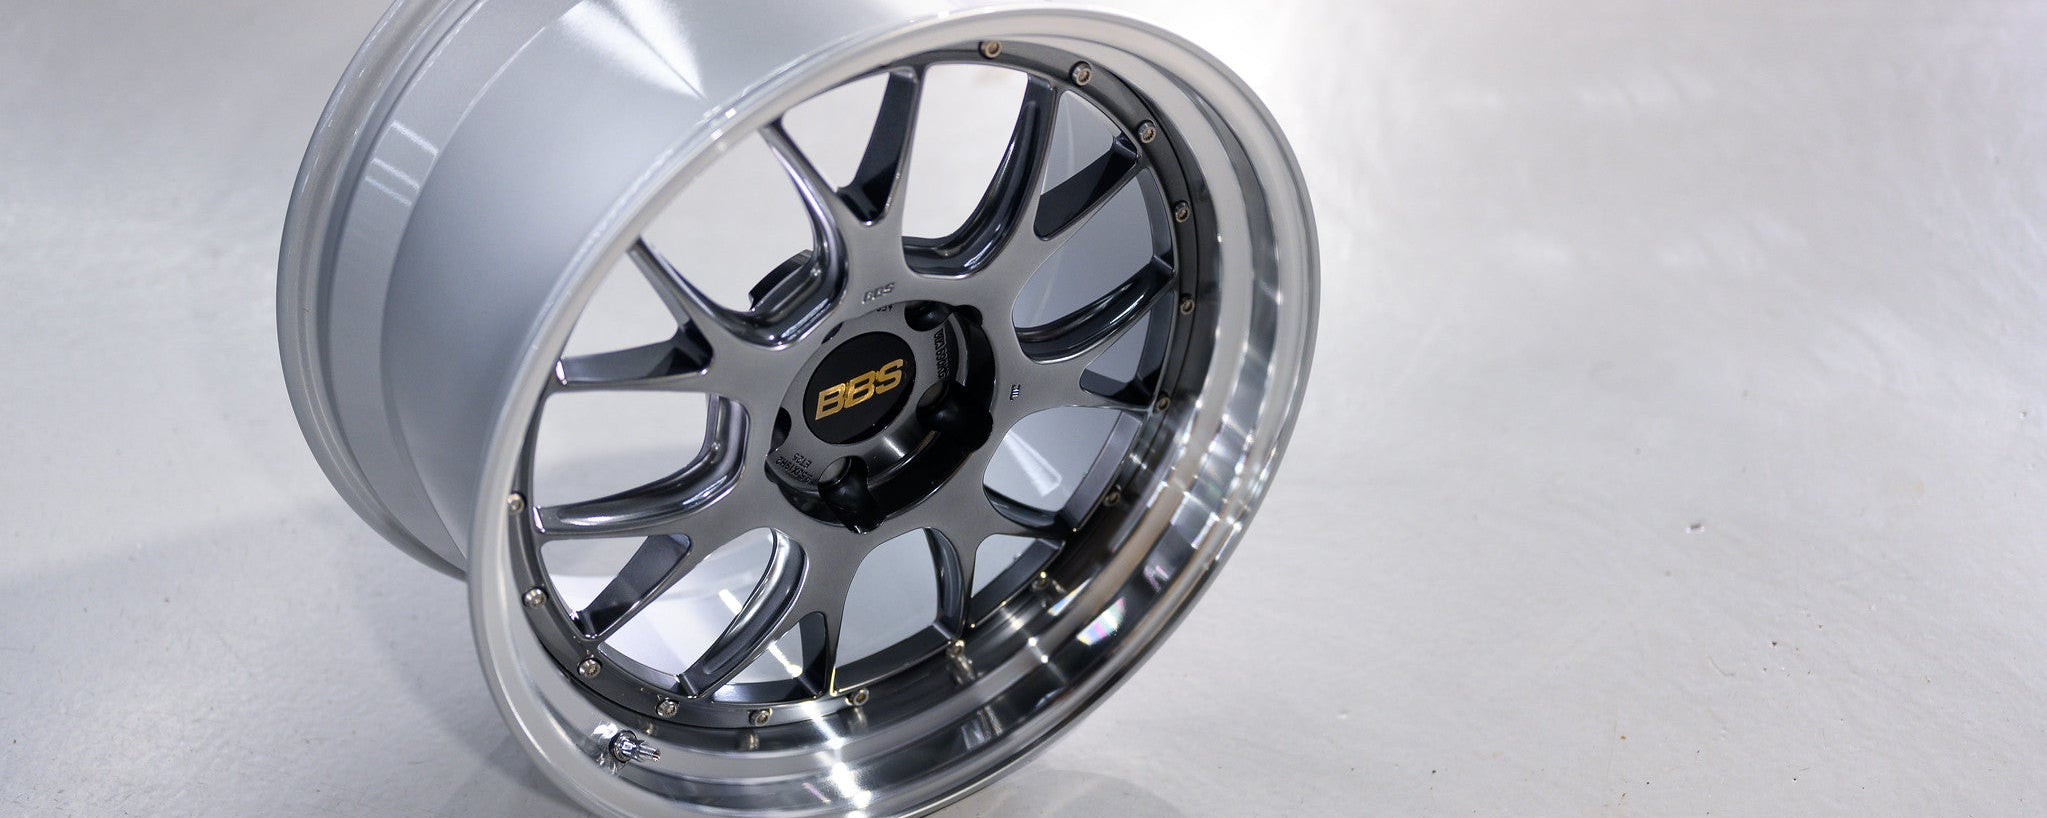 BBS LM-R - Premium Wheels from BBS Japan - From just $7690.00! Shop now at MK MOTORSPORTS